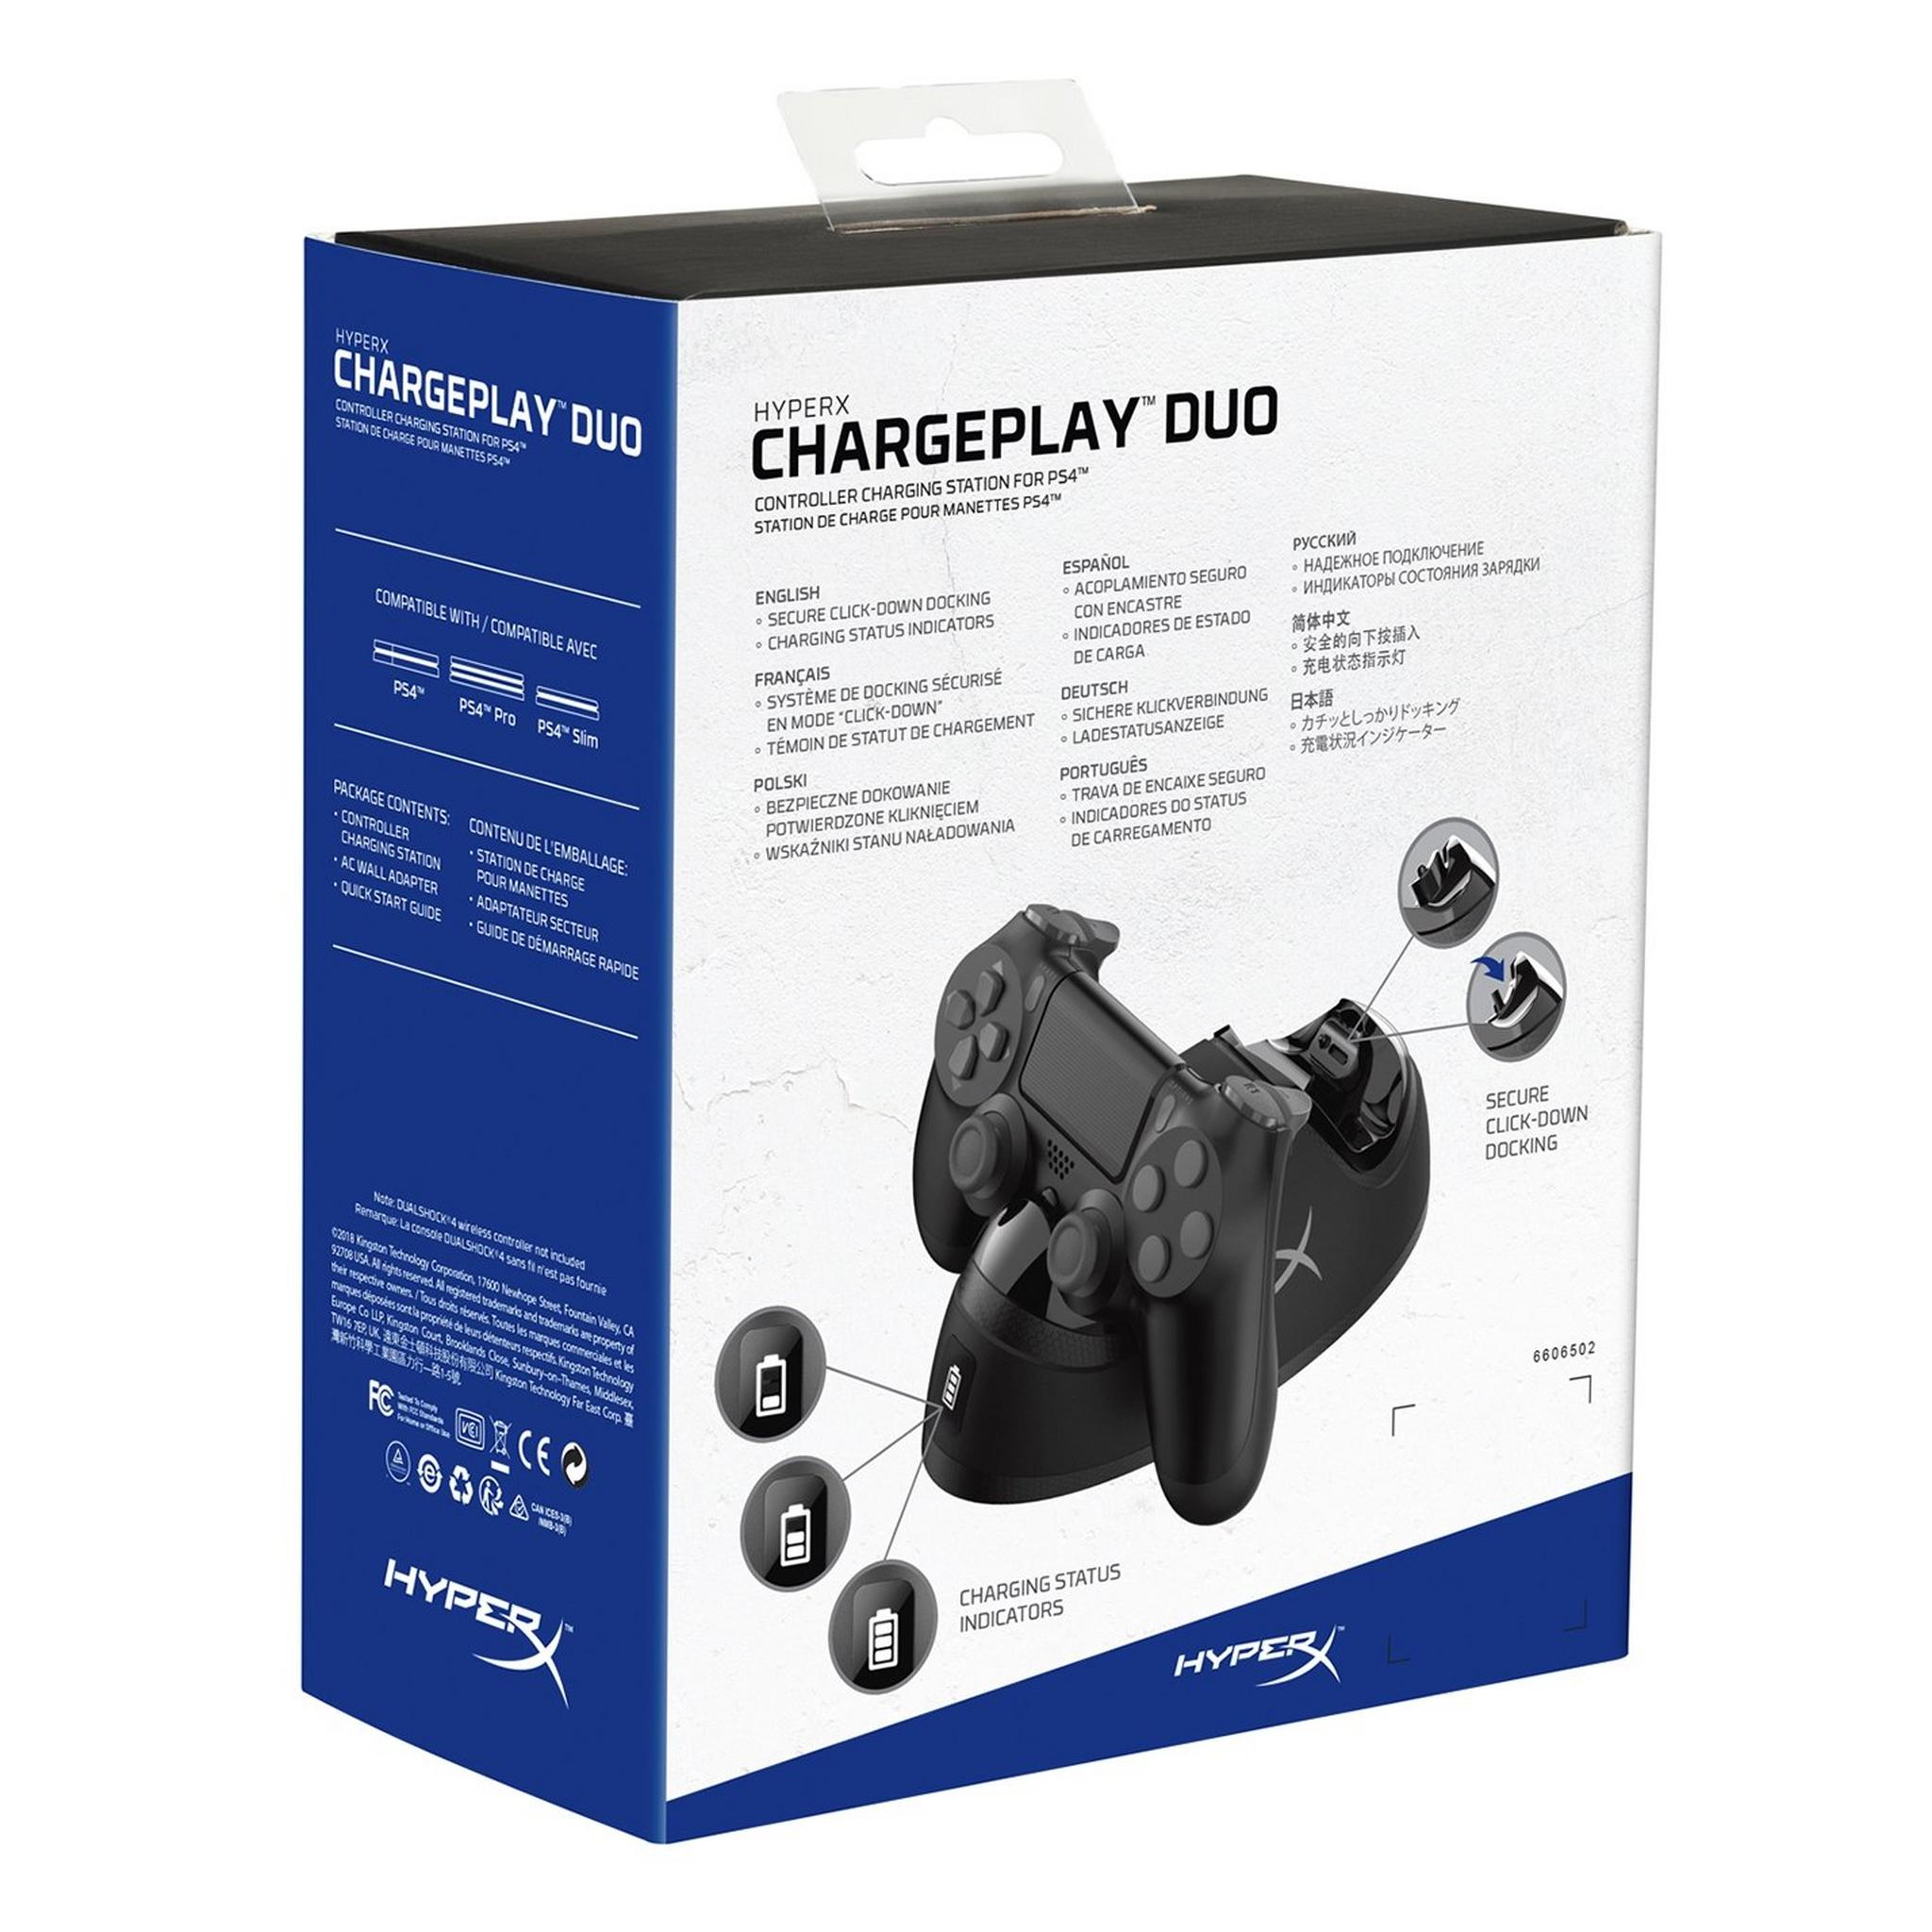 HyperX Chargeplay Duo Playstation 4 Controller Charging Station